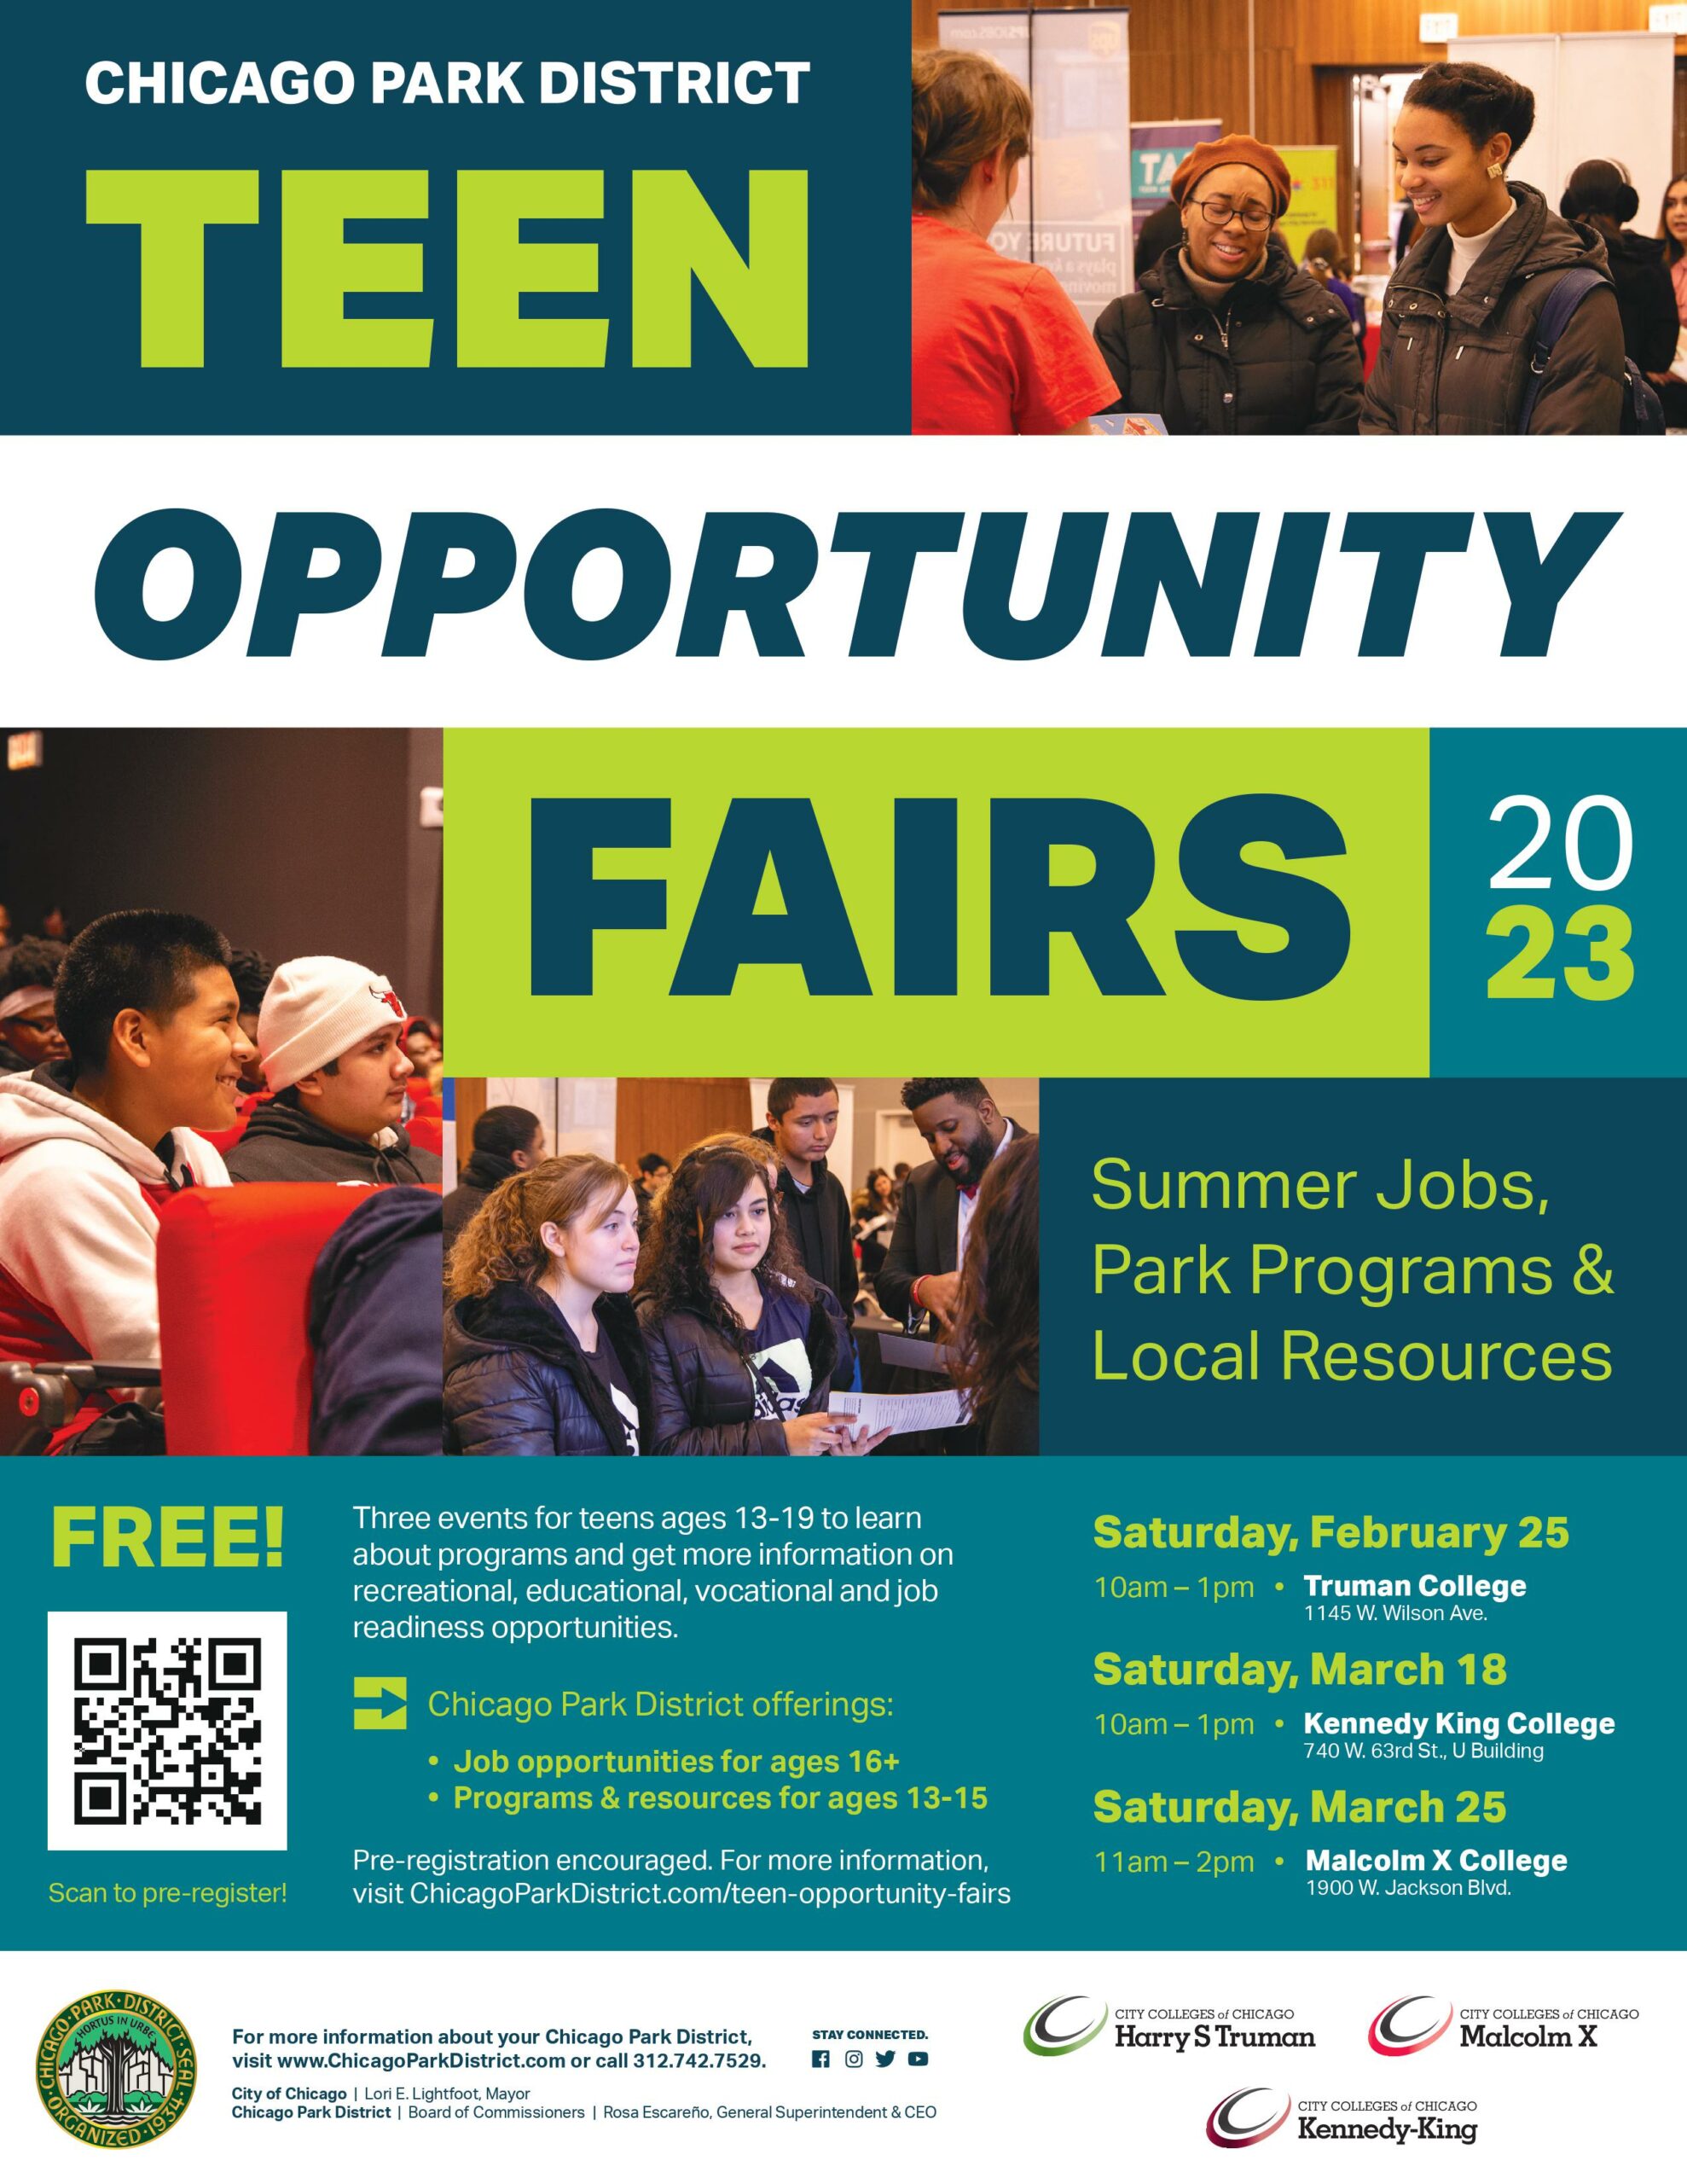 Flyer for Teen Opportunity Fair Summer Jobs, Park Programs & Local Resources